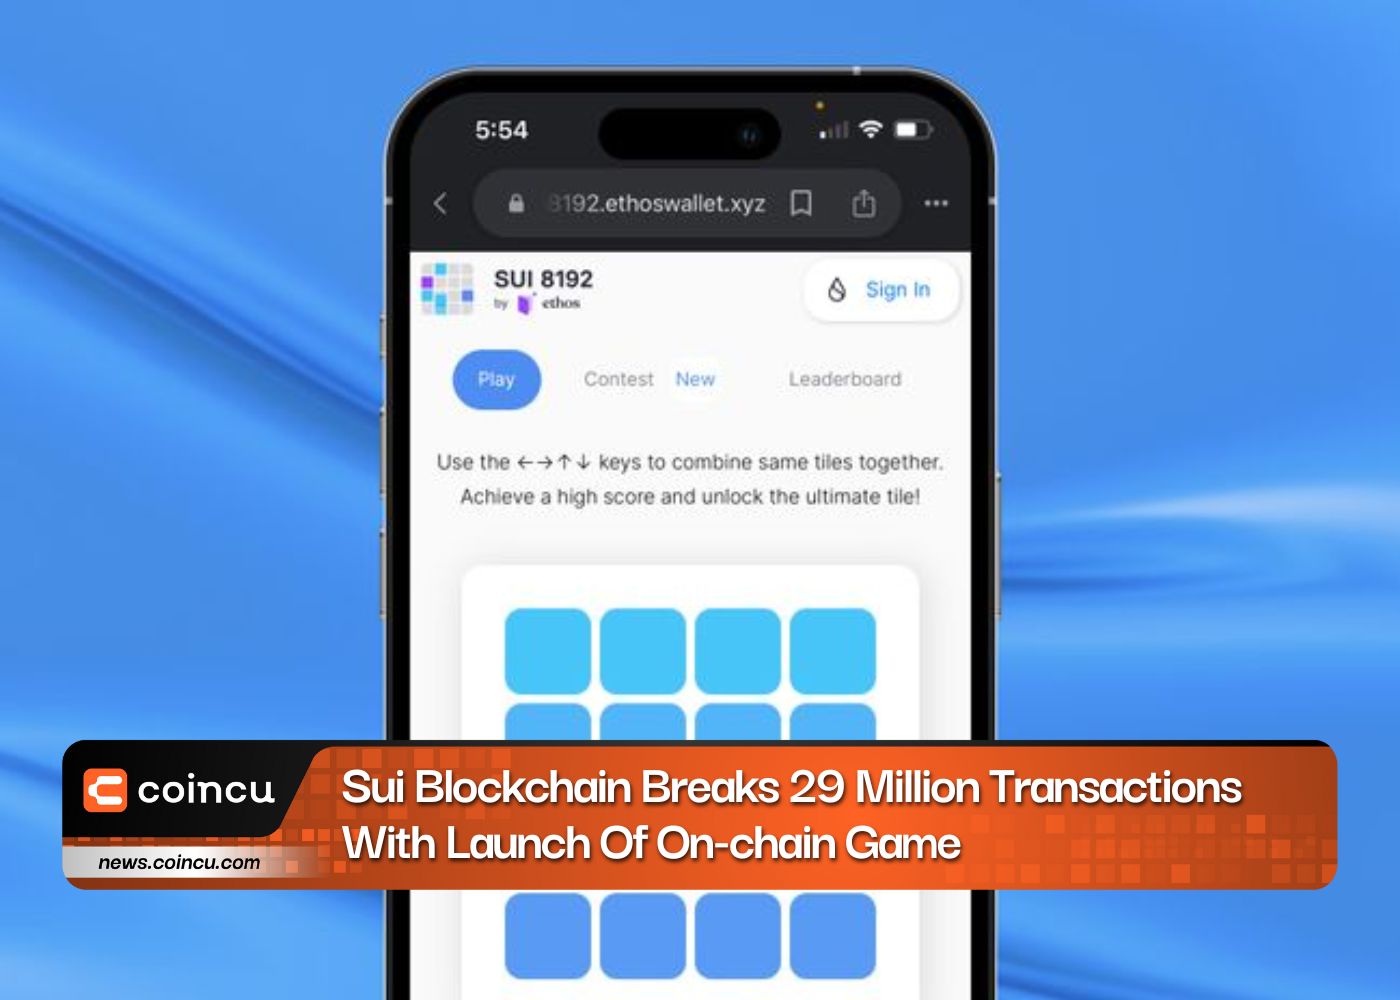 Sui Blockchain Breaks 29 Million Transactions With Launch Of On-chain Game